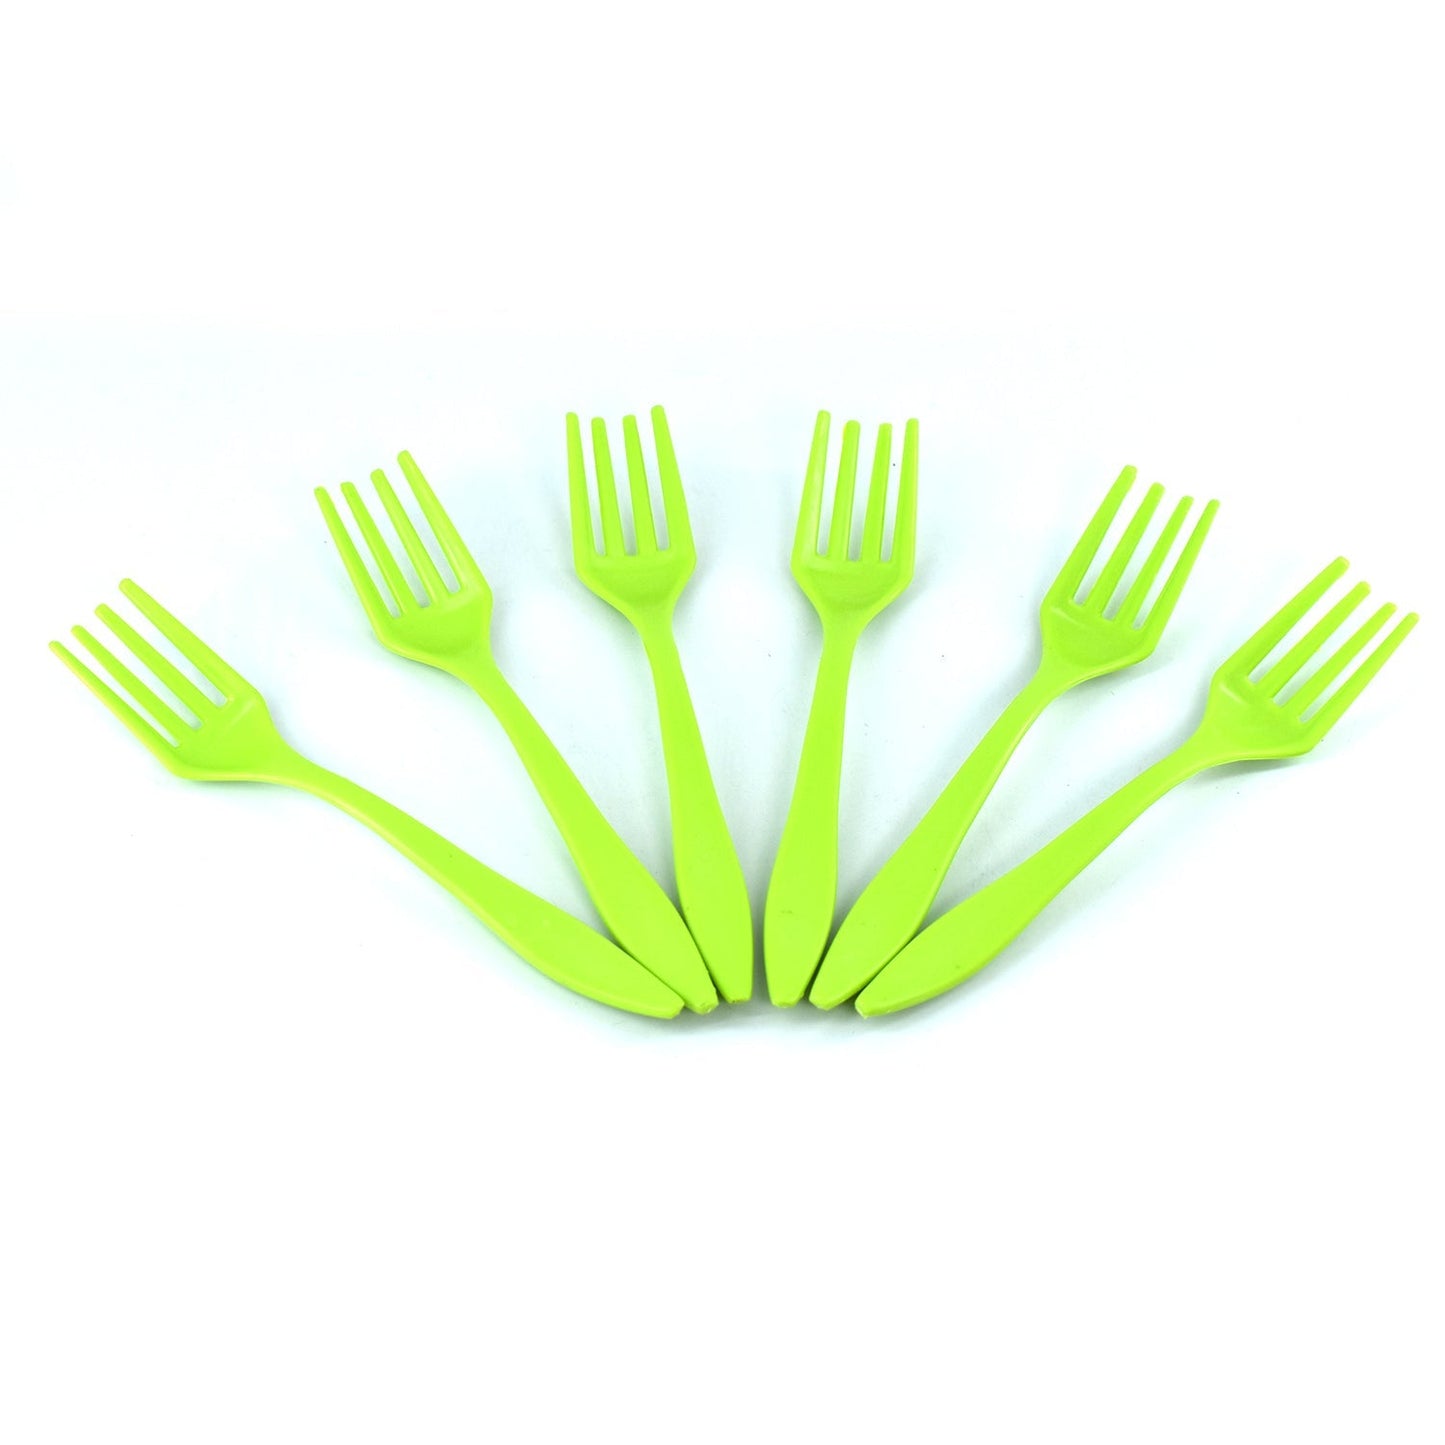 2839 Small plastic 6pc Serving Fork Set for kitchen DeoDap